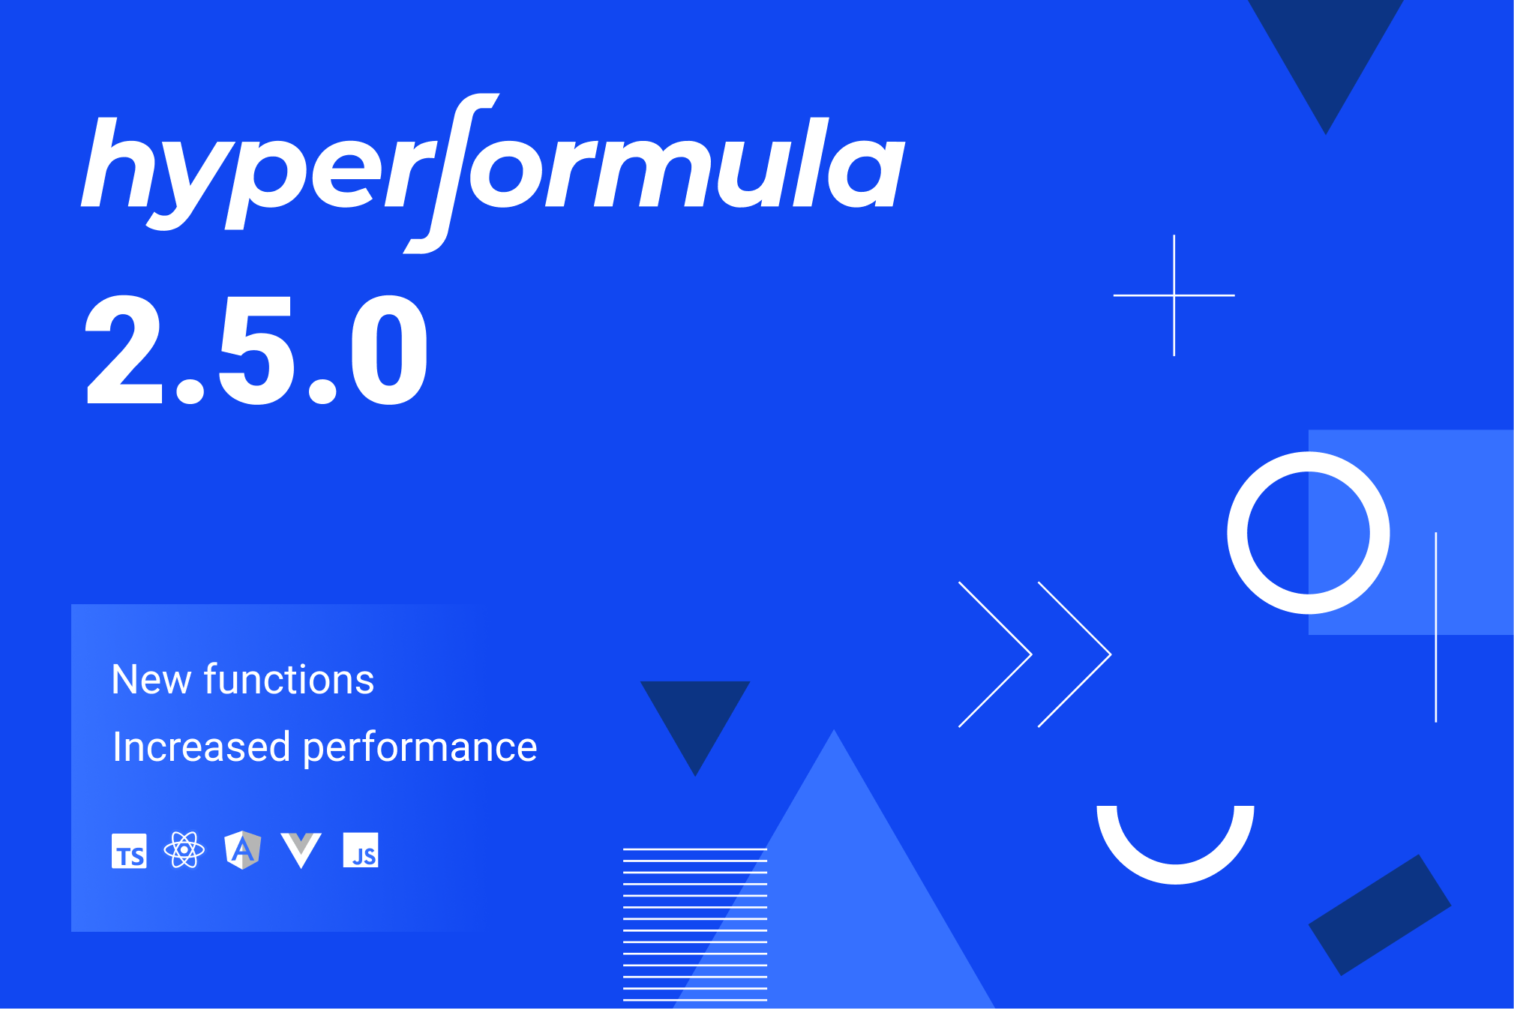 HyperFormula 2.5.0: New functions and performance improvements